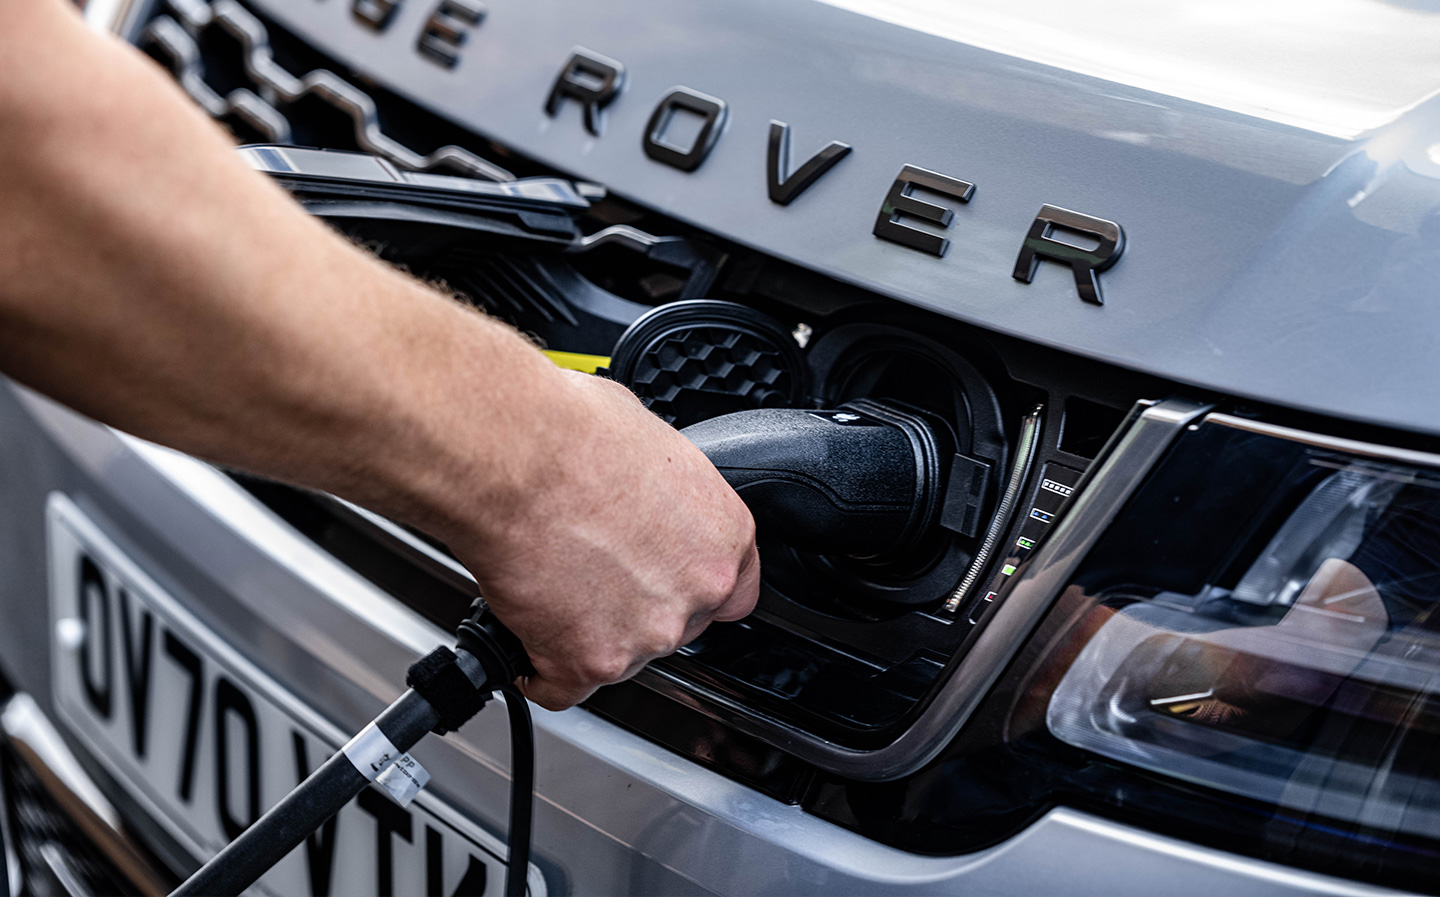 Charging - Long-term review of the 2020 Range Rover Sport P400e plug-in hybrid 4x4 by WIll Dron for Sunday Times Driving.co.uk